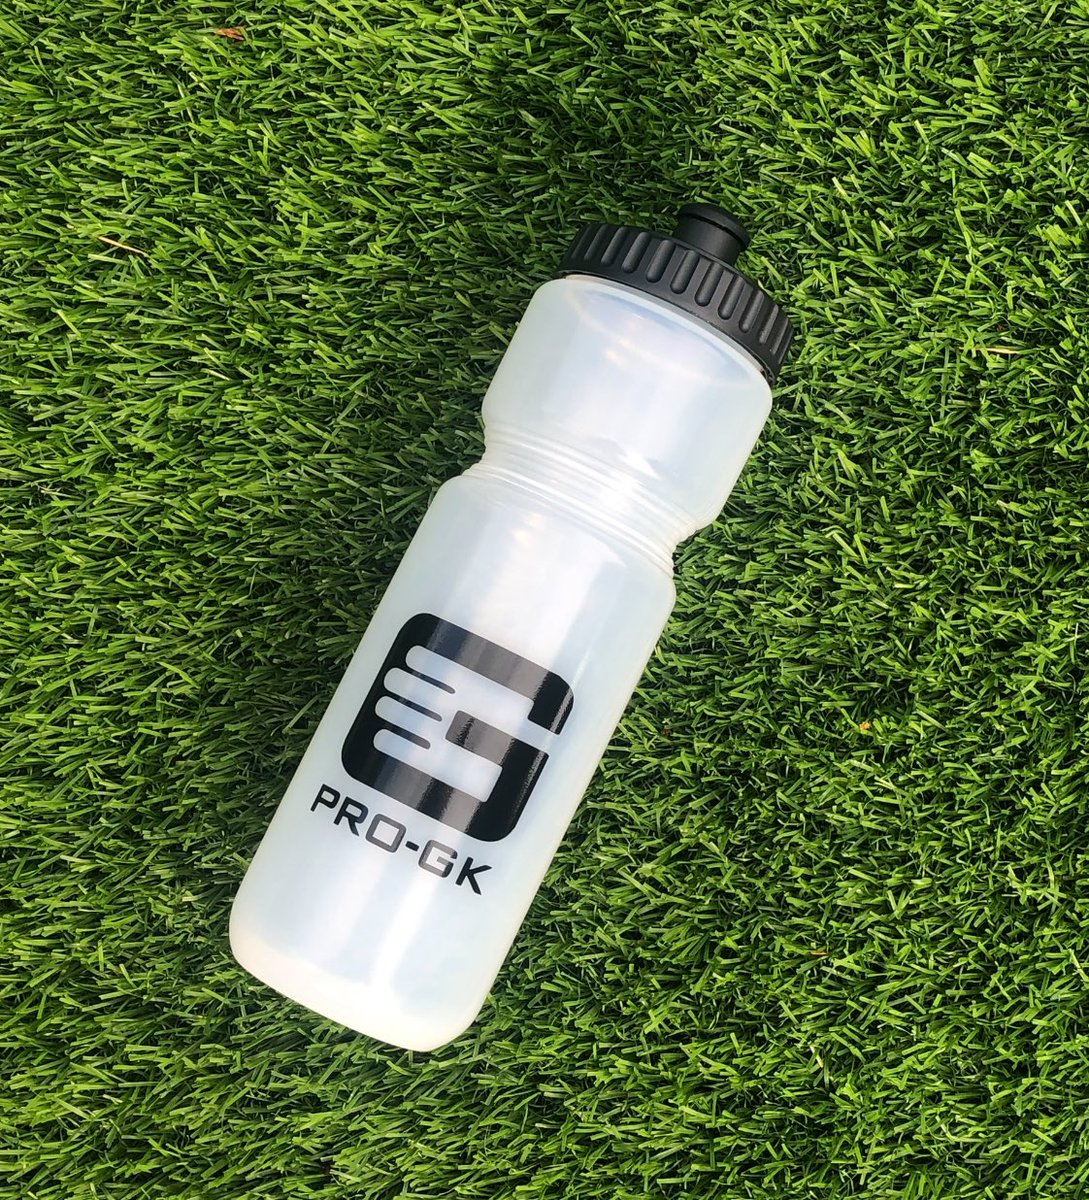 Order 2 pairs of gloves (not inc sale) and you’ll receive a Tekta Water Bottle worth £11.99 for FREE! If you spend over £90, you’ll get Free shipping (UK only) & a Tekta Water Bottle for FREE! Use code - freewb pro-gk.com 🧤👀